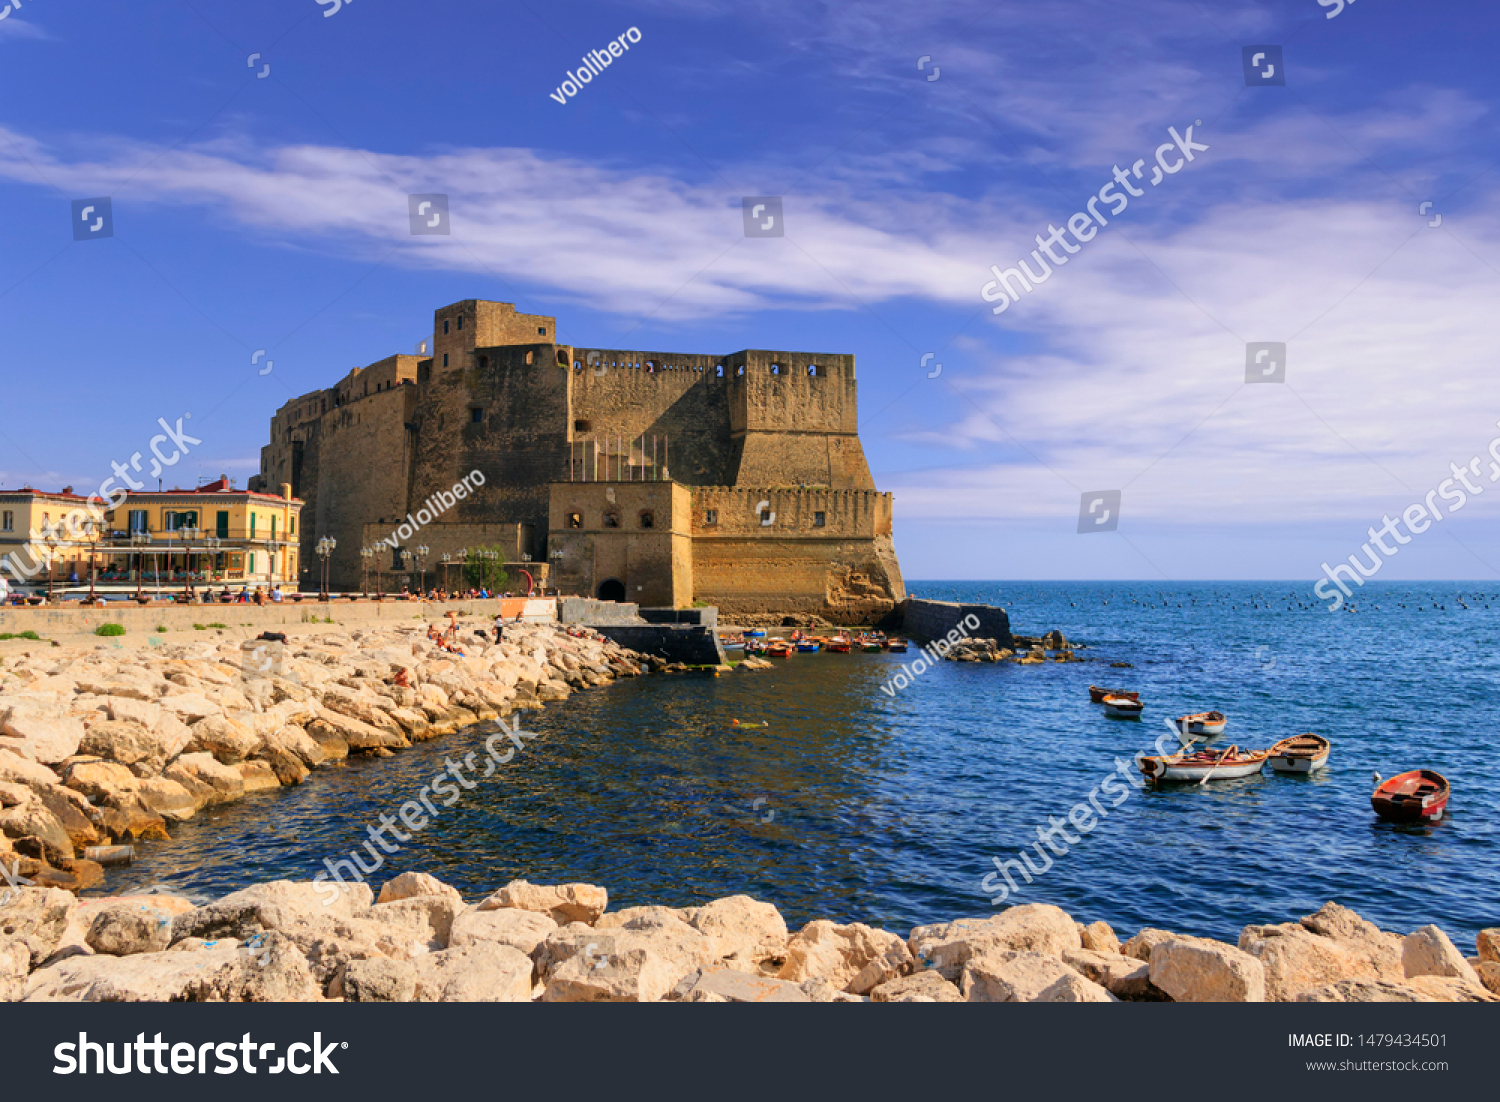 Castel dell'Ovo (Egg Castle) a medieval fortress in the bay of Naples, Italy. #1479434501